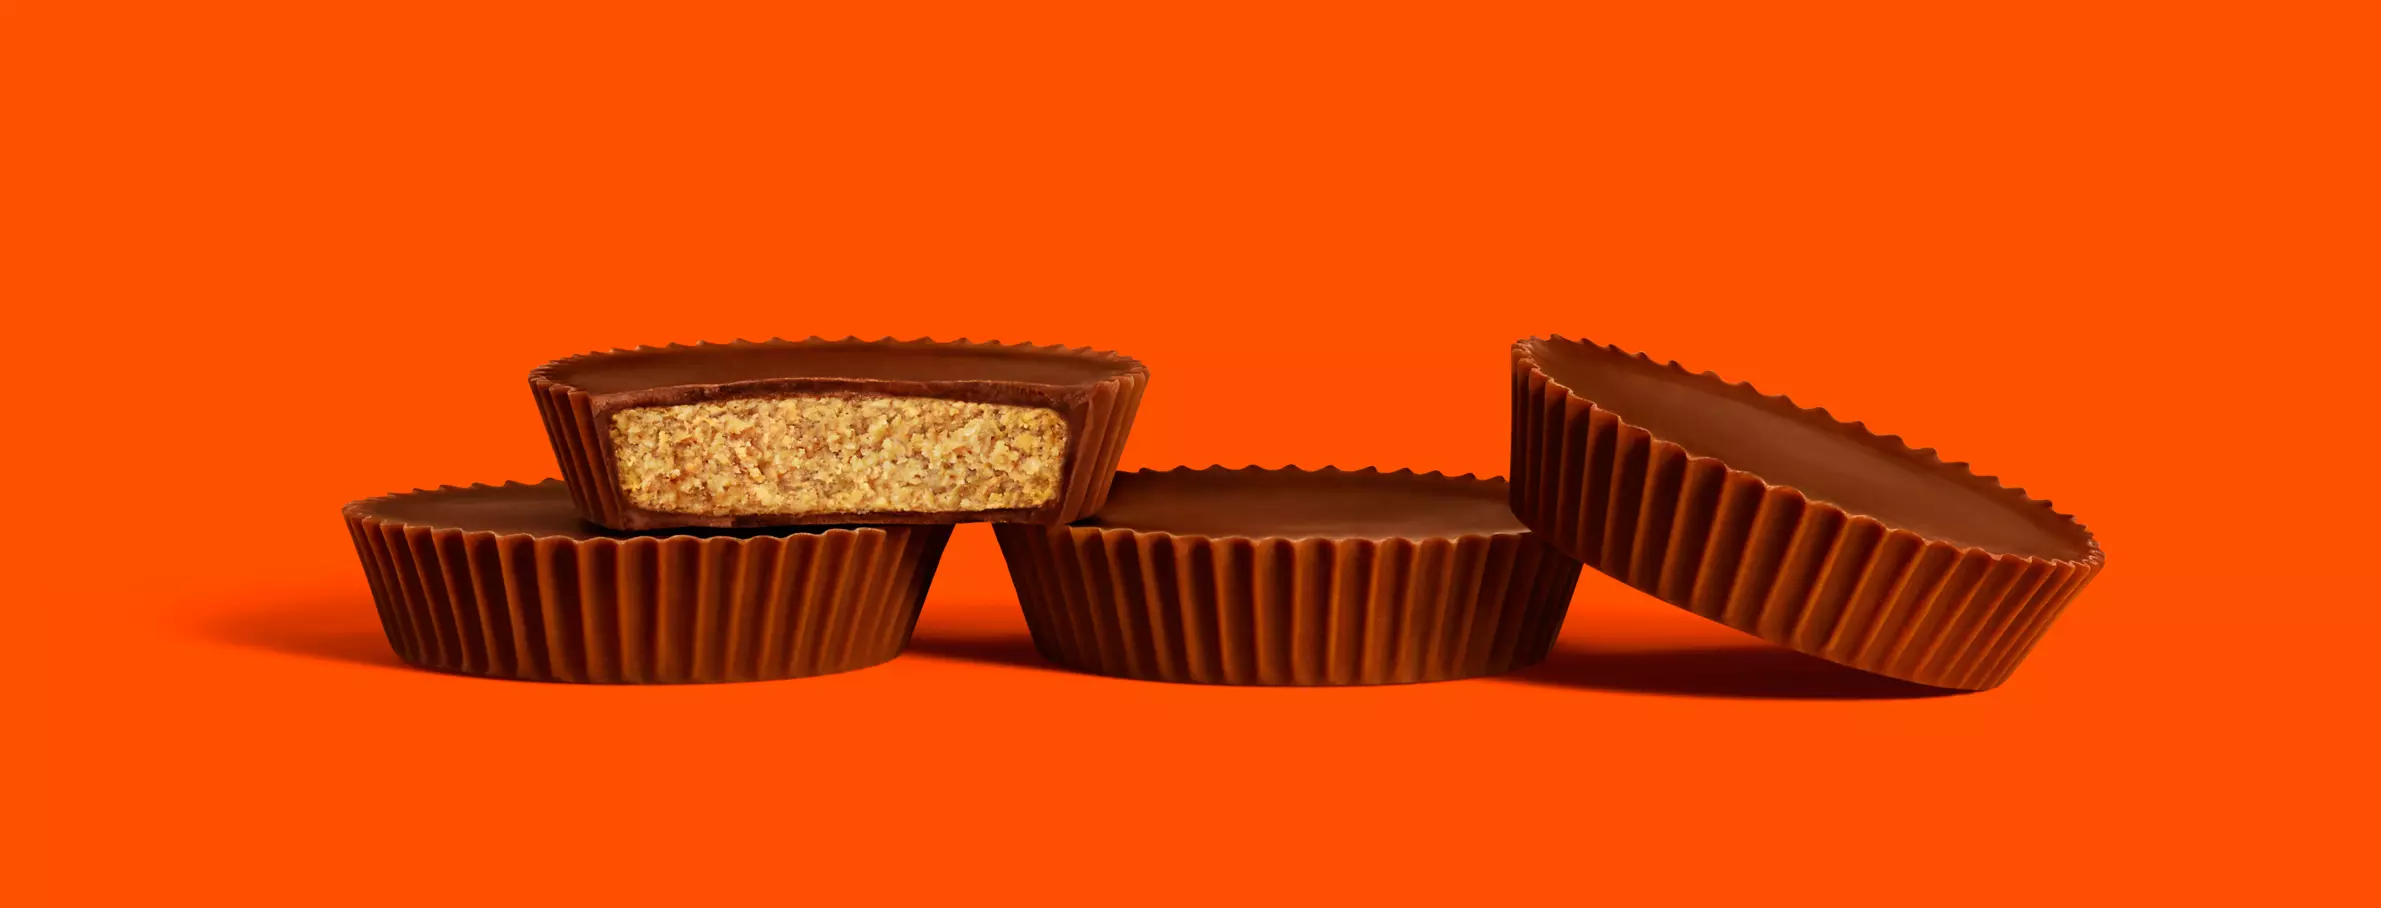 REESE'S Milk Chocolate King Size Peanut Butter Cups, 2.8 oz - Out of Package